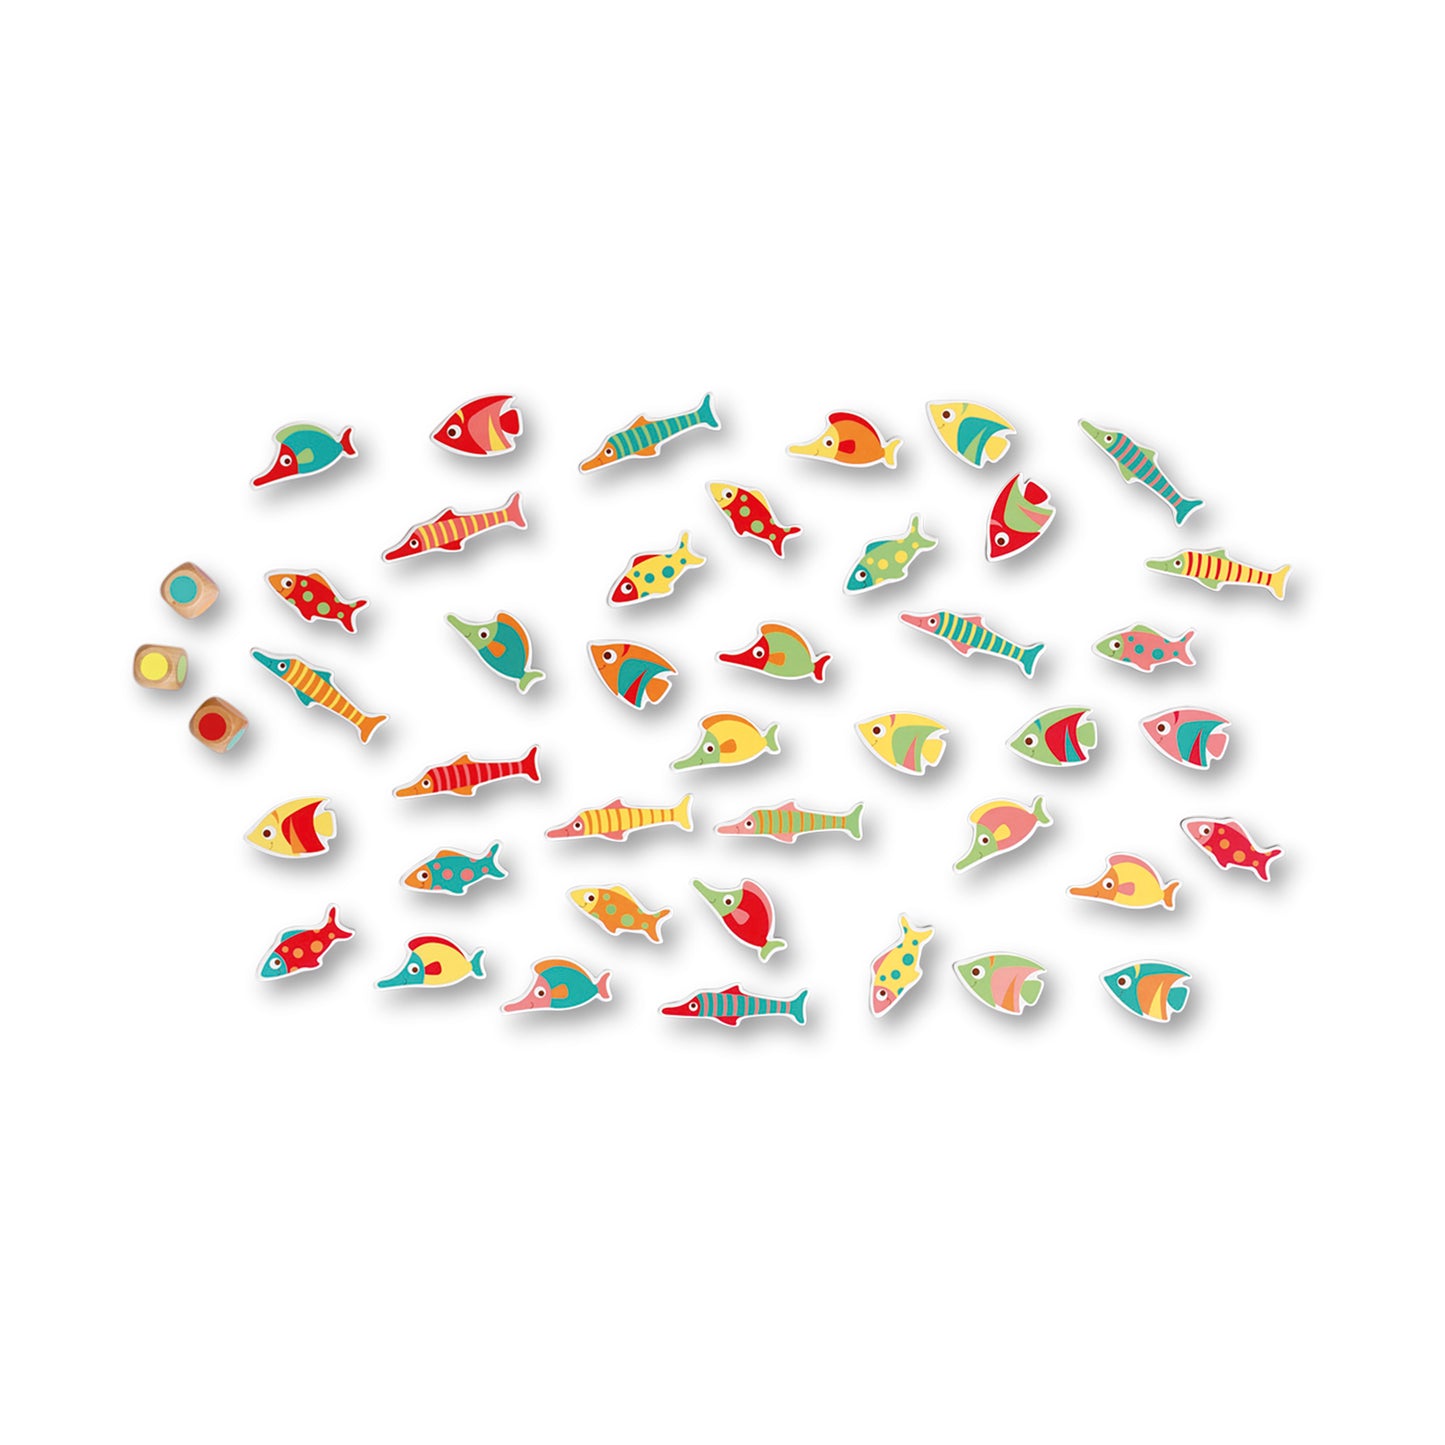 Find-a-Fish Game